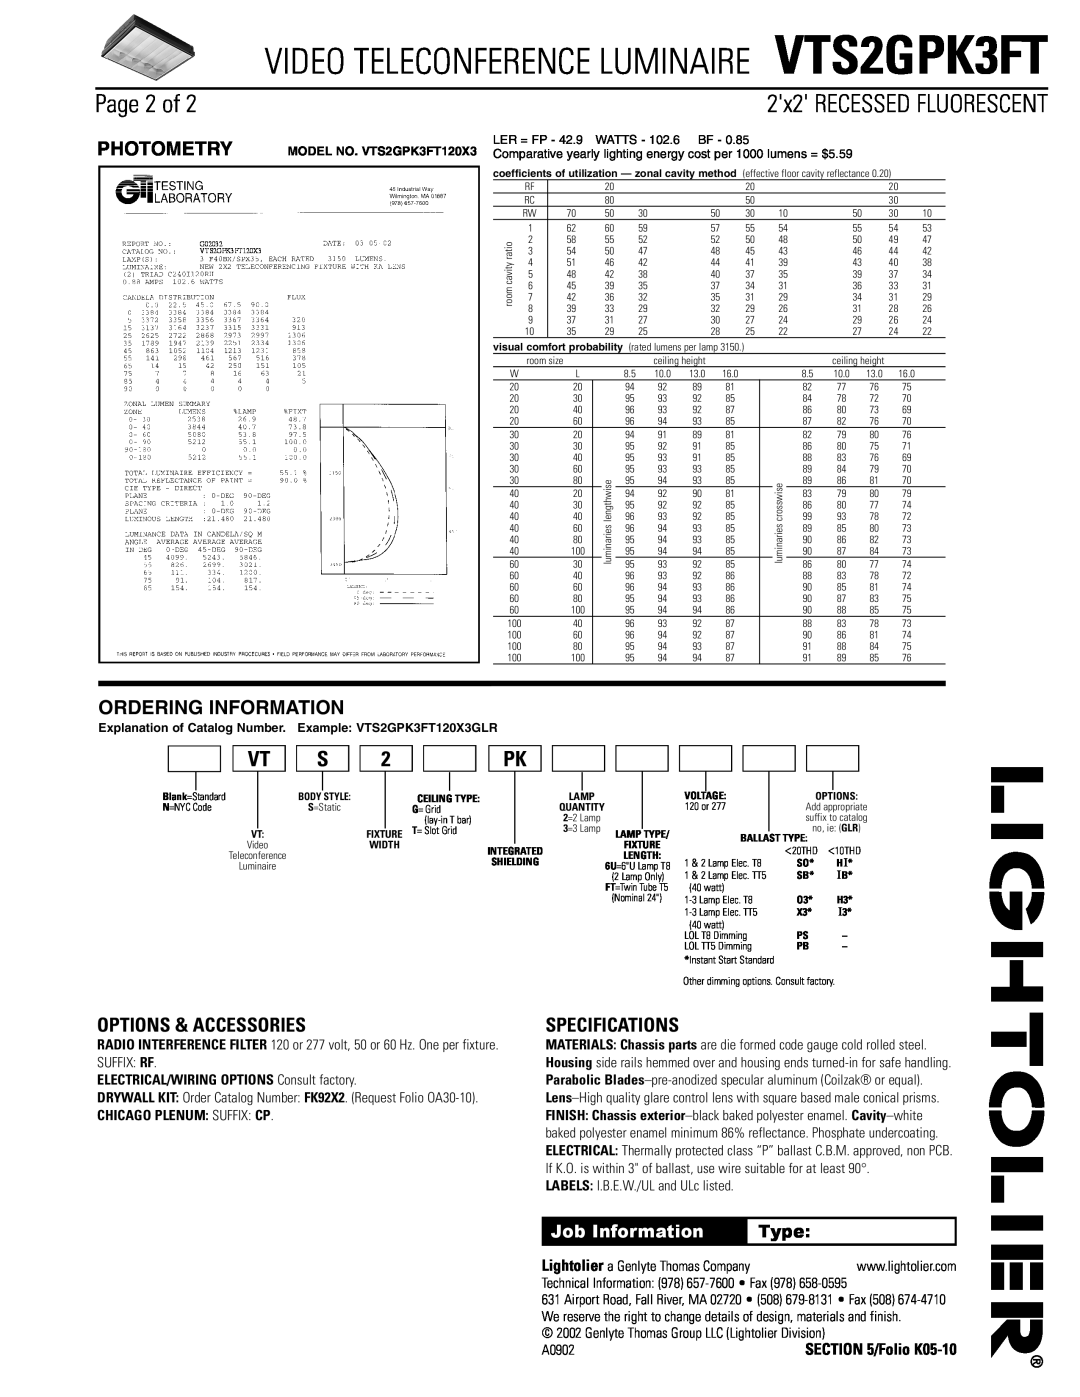 Lightolier VTS2GPK3FT Page 2 of, Photometry, Ordering Information, Options & Accessories, Specifications, Job Information 